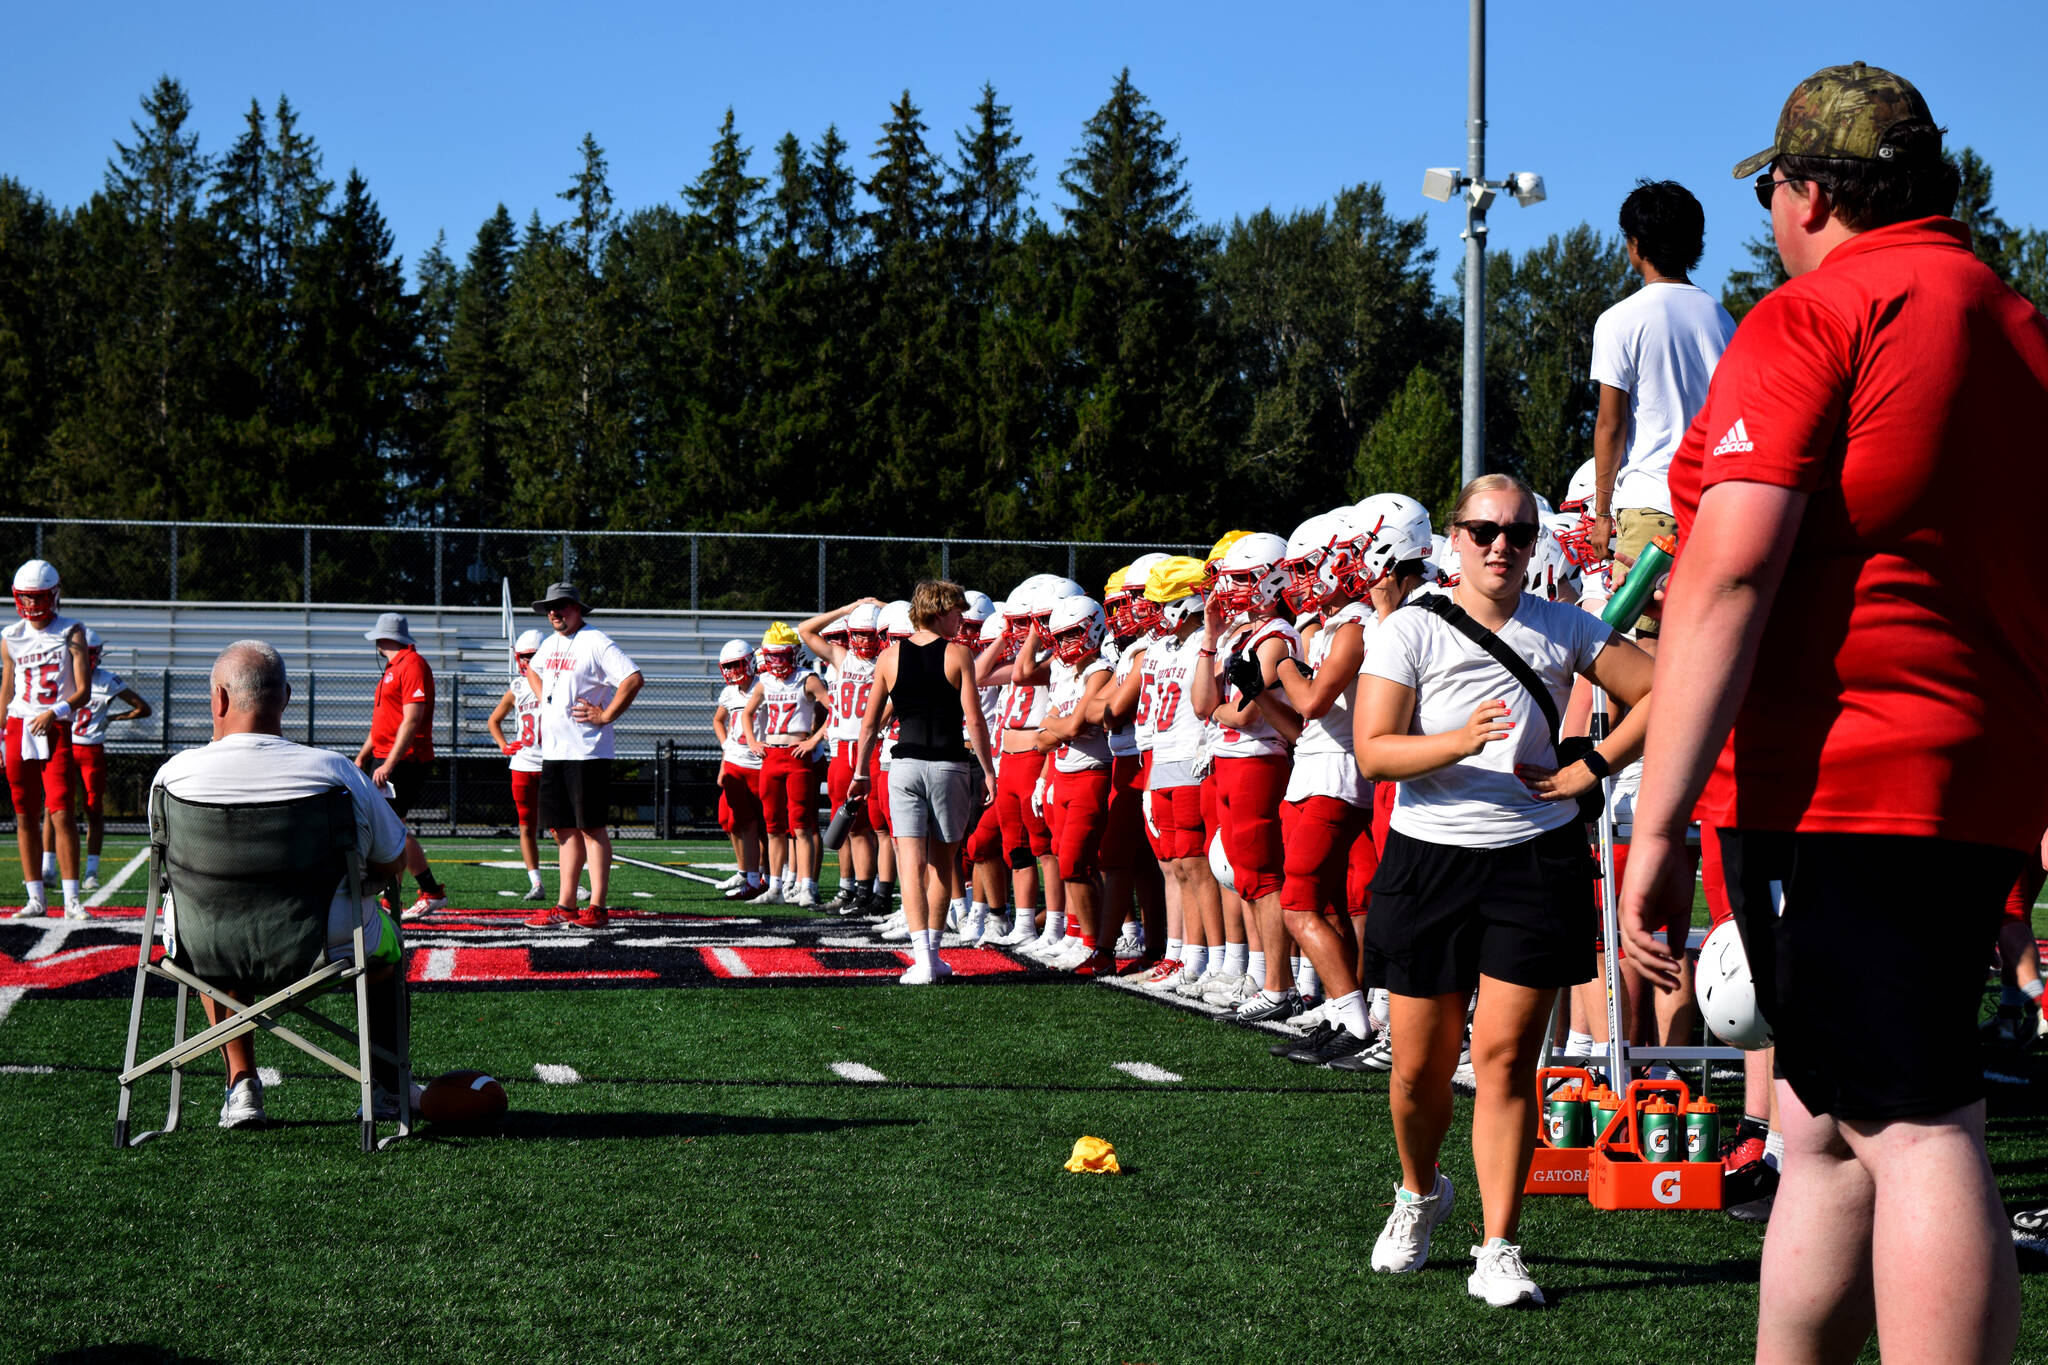 The Mount Si Football lines up at its first official practice of the 2022 season on Aug. 17. Photo Conor Wilson/Valley Record.